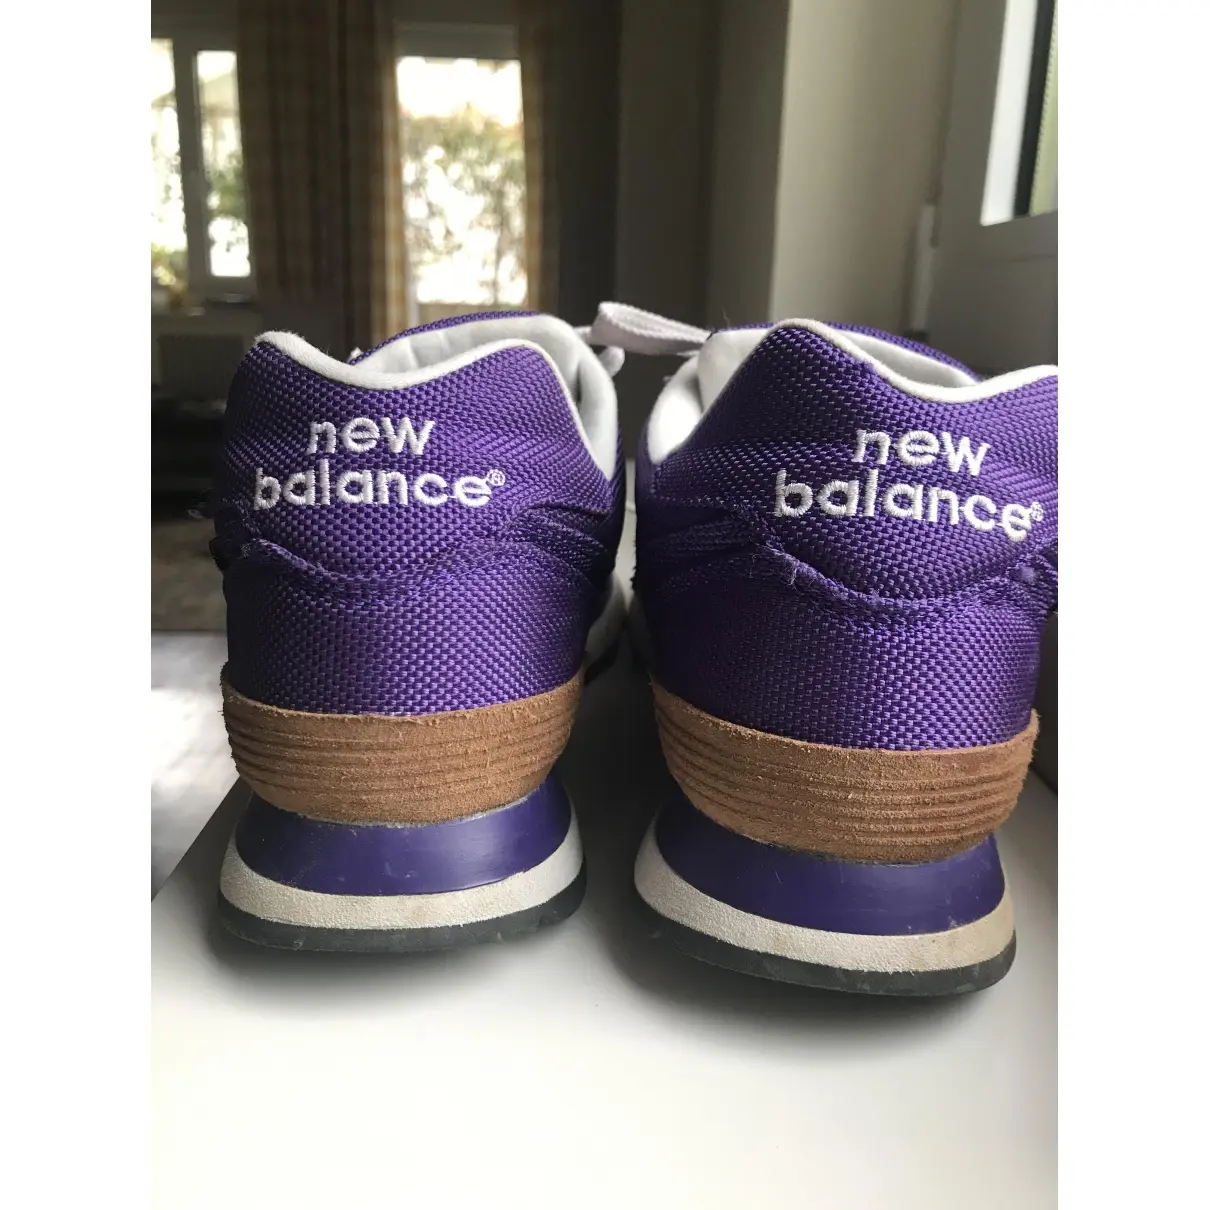 New Balance Trainers for sale